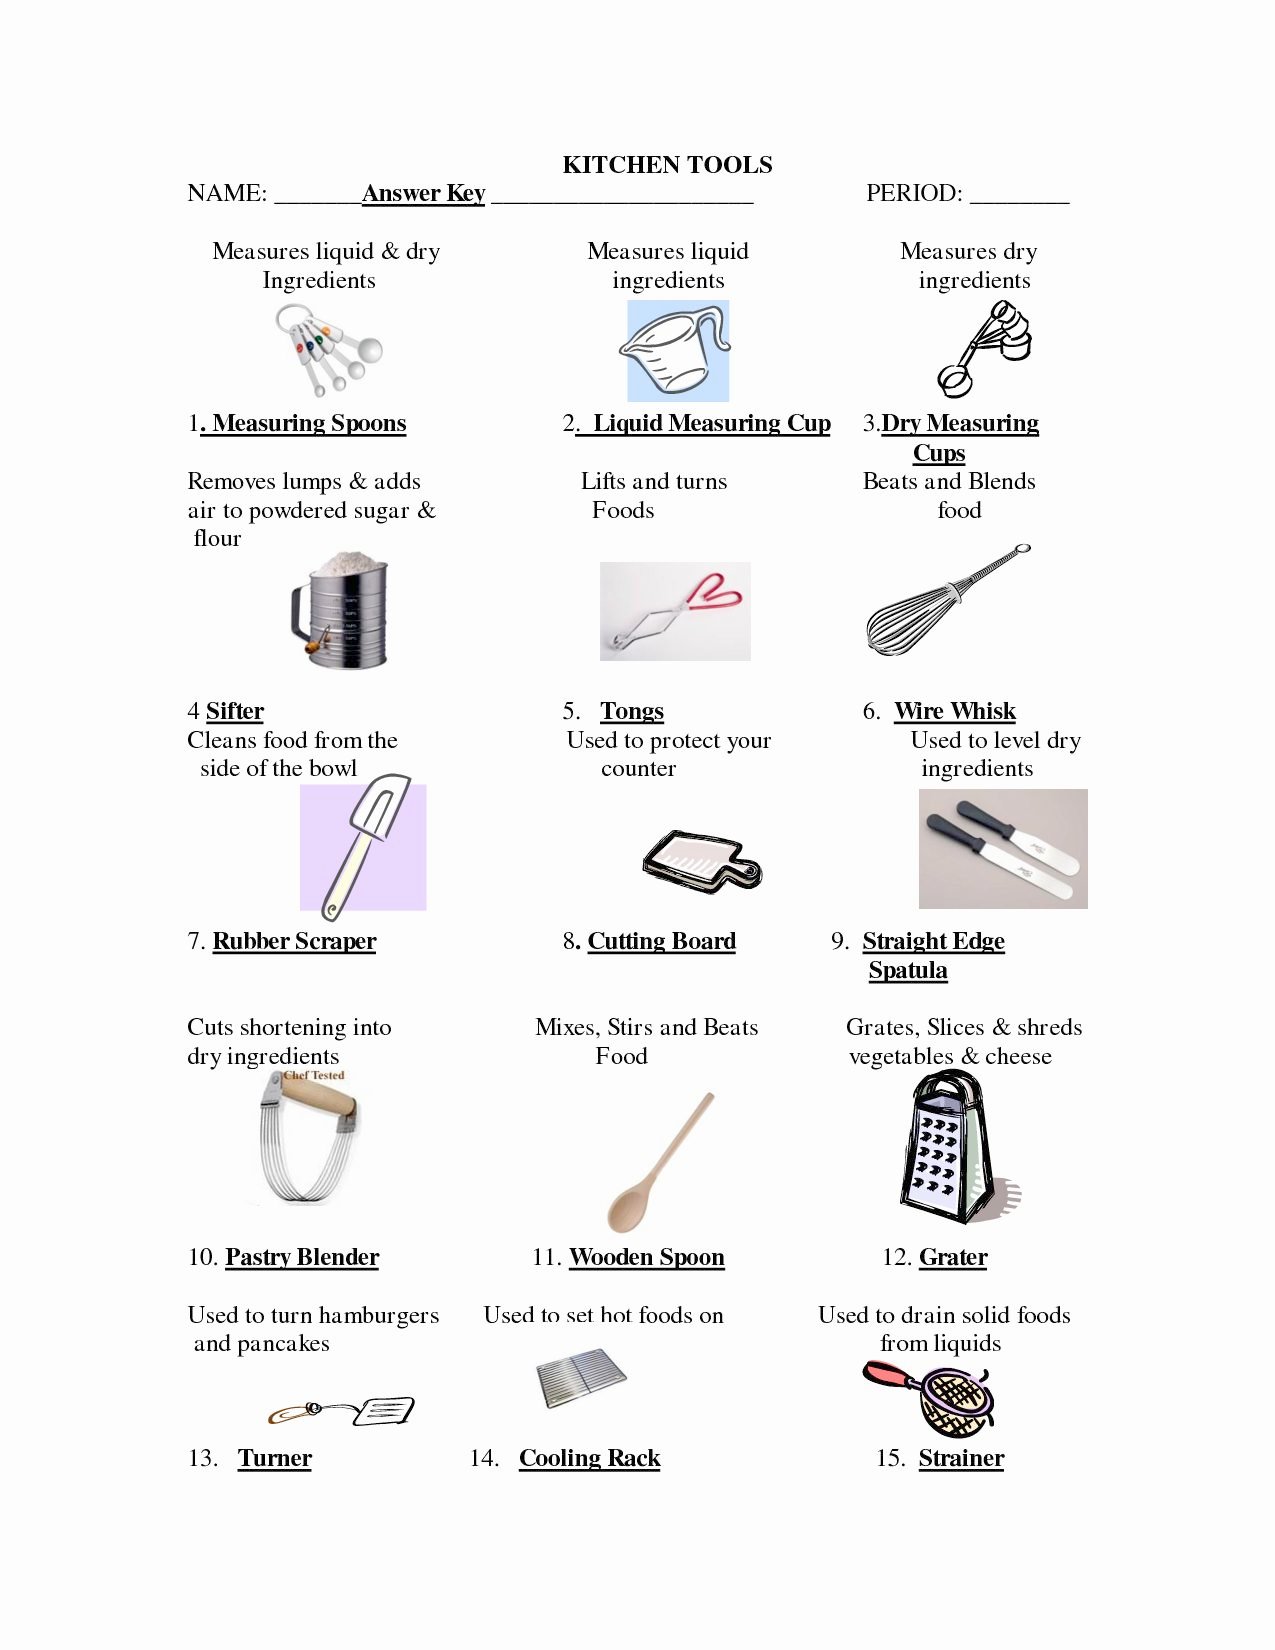 Charming List Of Kitchen Utensils And Their Uses With Pictures Full Size Of Kitchen:attractive Kitchen Utensils And Their Uses Tools Equipments Equipment Names Cooking ...